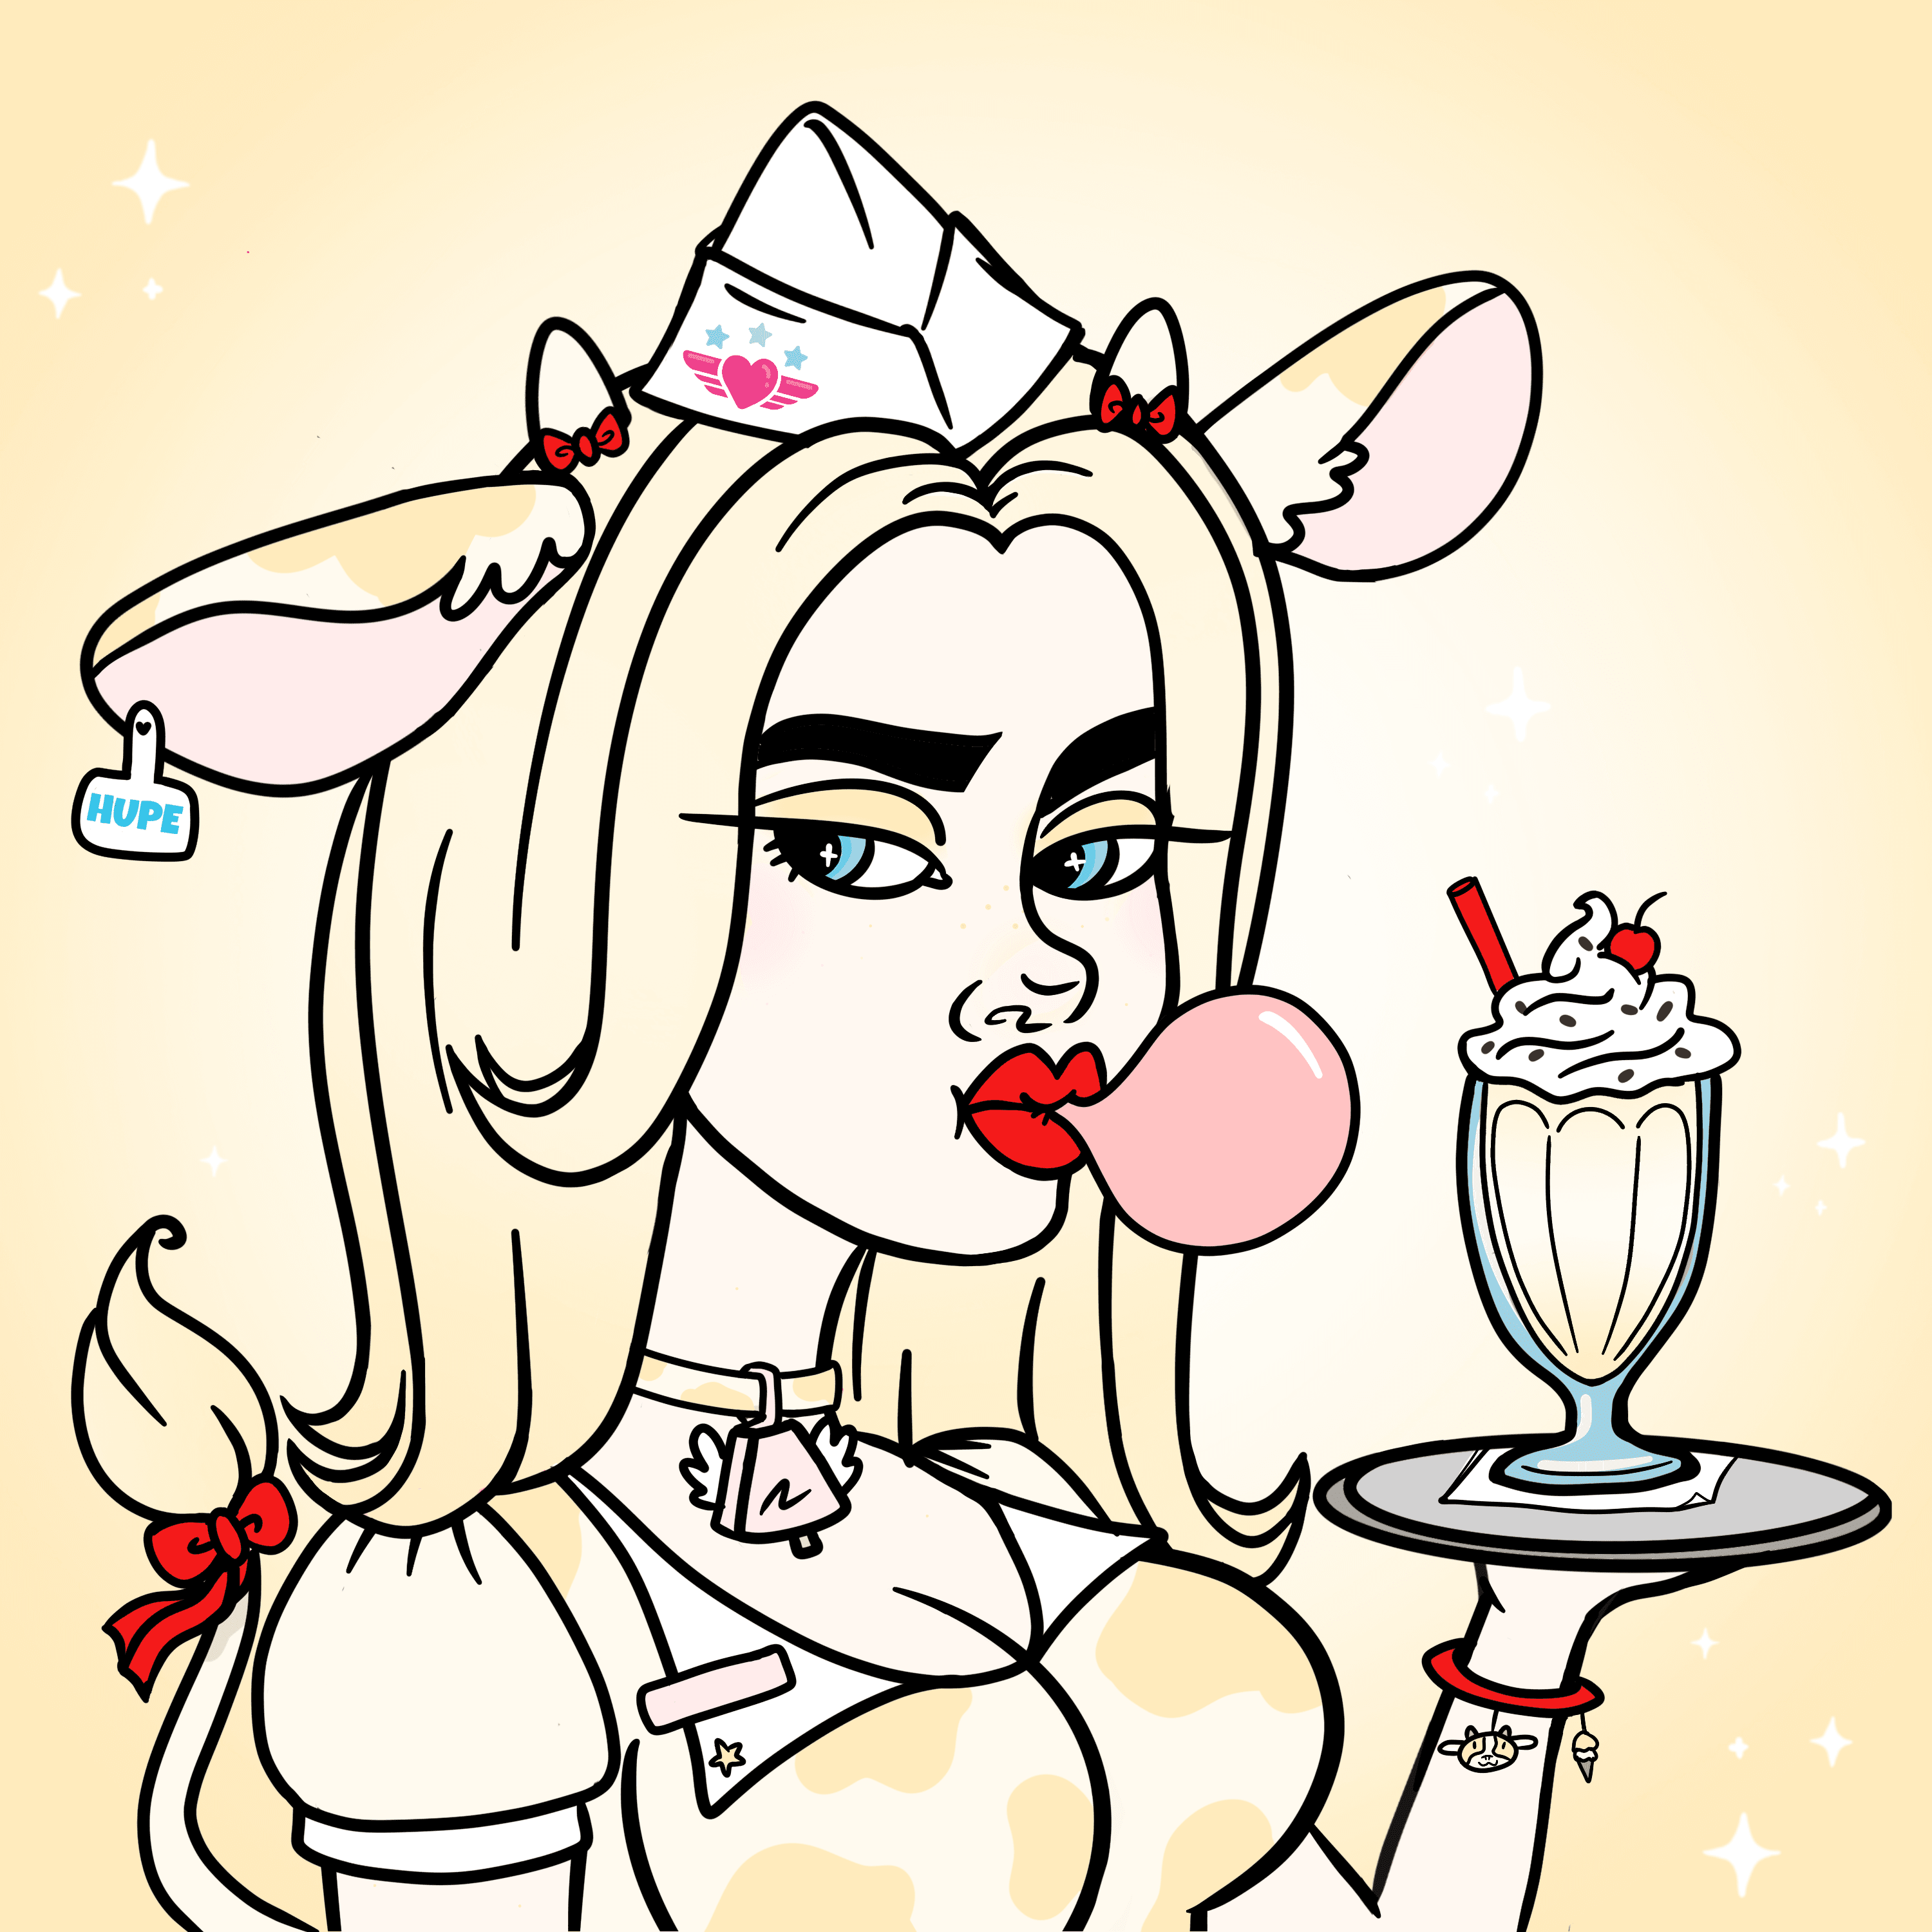 Dotty - Moo Shakers Diner Babe